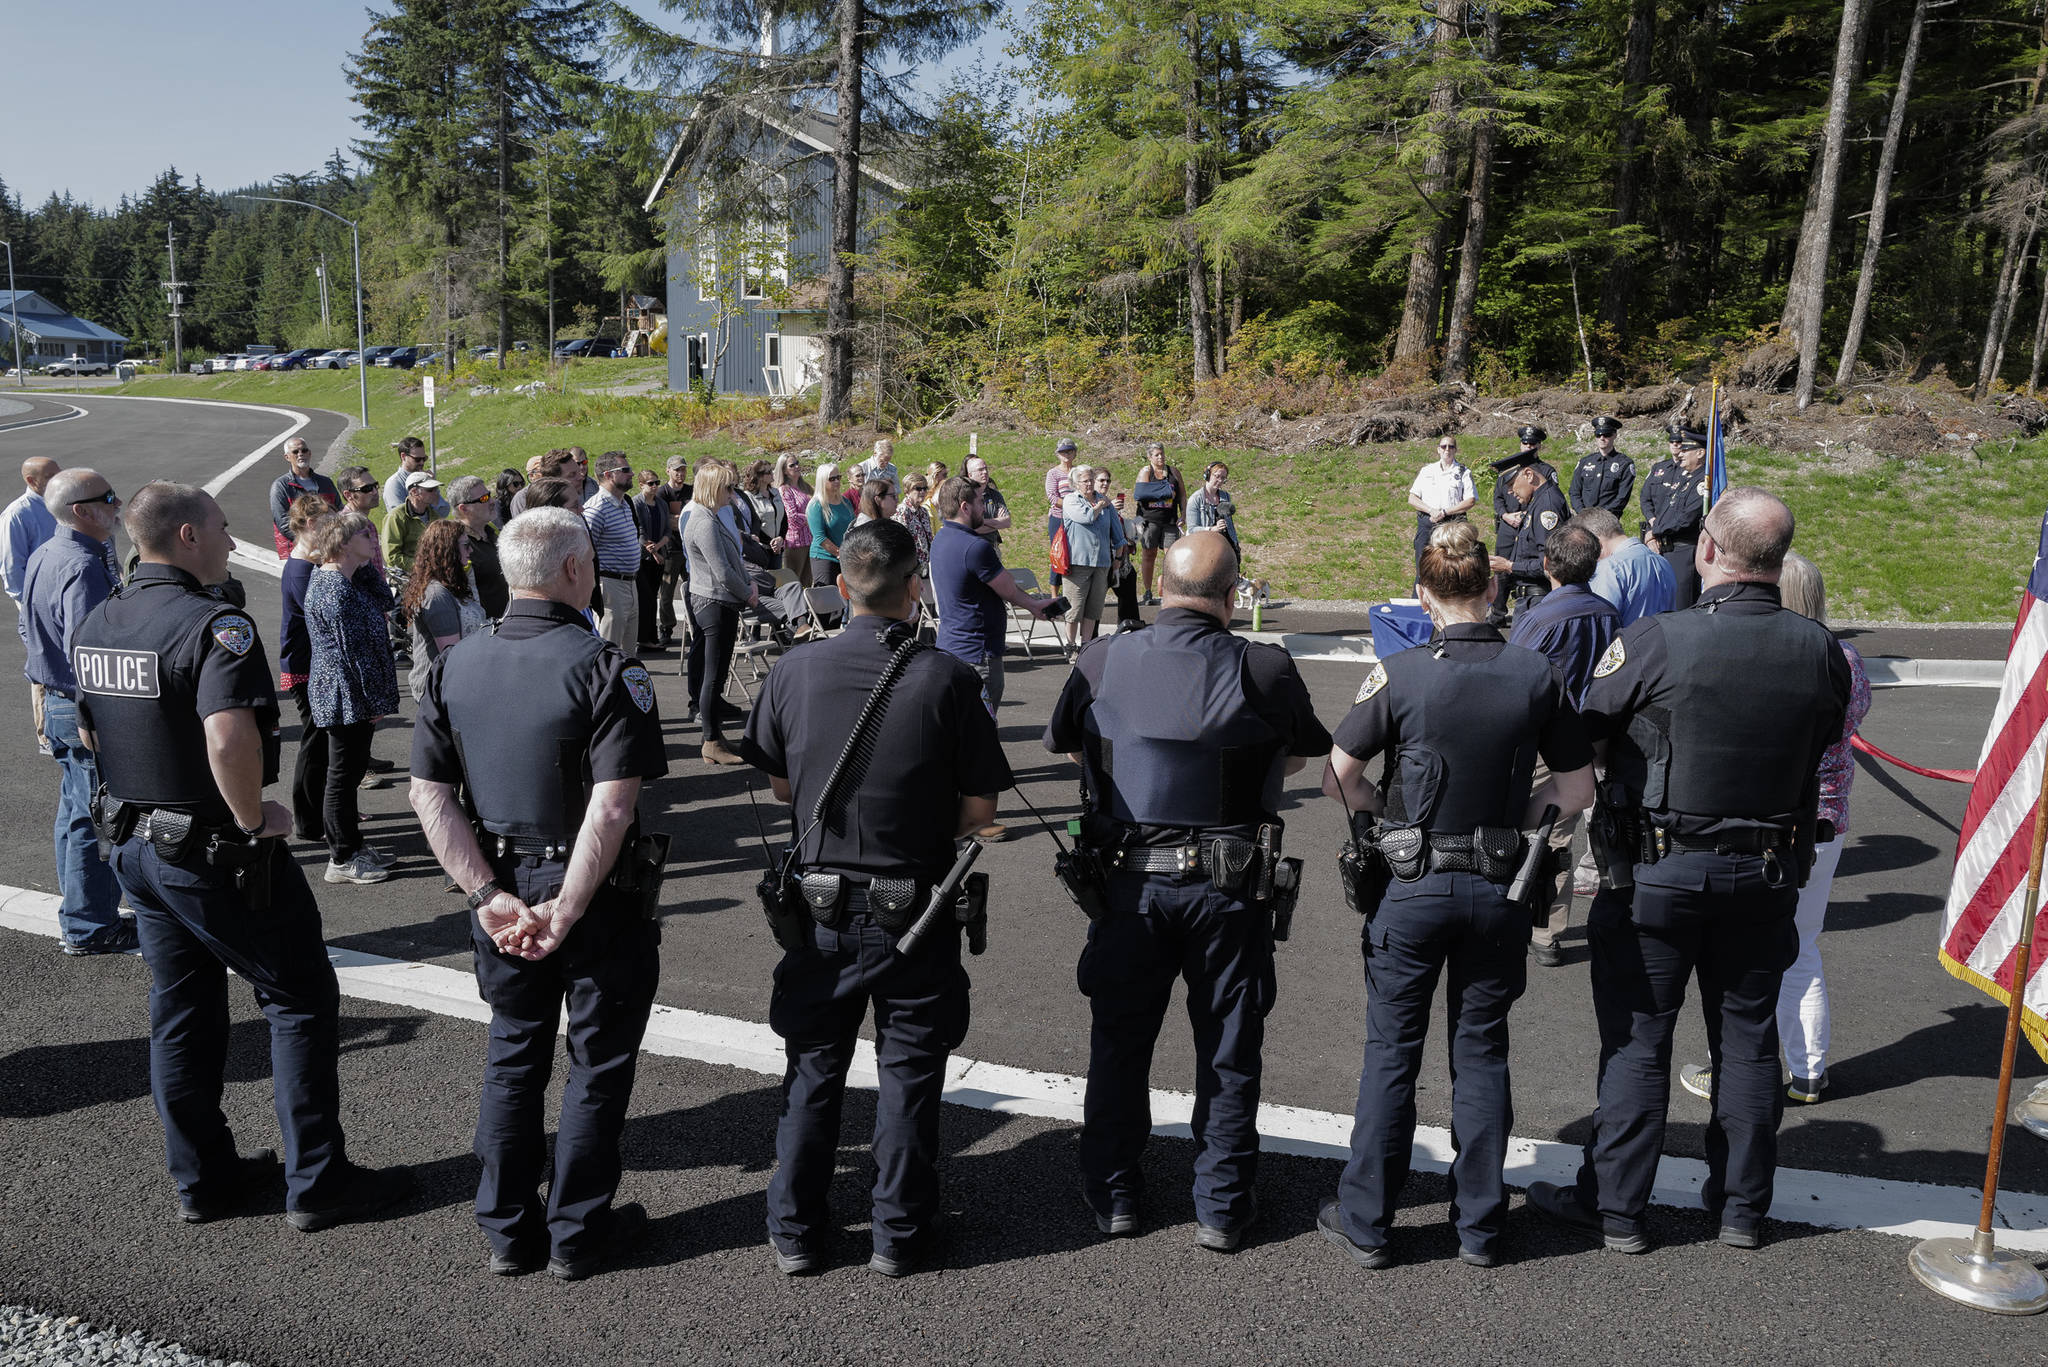 Juneau Police Department officers attend a ribbon-cutting ceremony with others on Karl Reishus Boulevard to commemorate the near completion of the Pederson Hill Subdivision on Friday, Sept. 6, 2019. Reishus was a Juneau Police Department officer who died in 1992 when he fell from a 40-foot tower during a training exercise. (Michael Penn | Juneau Empire)